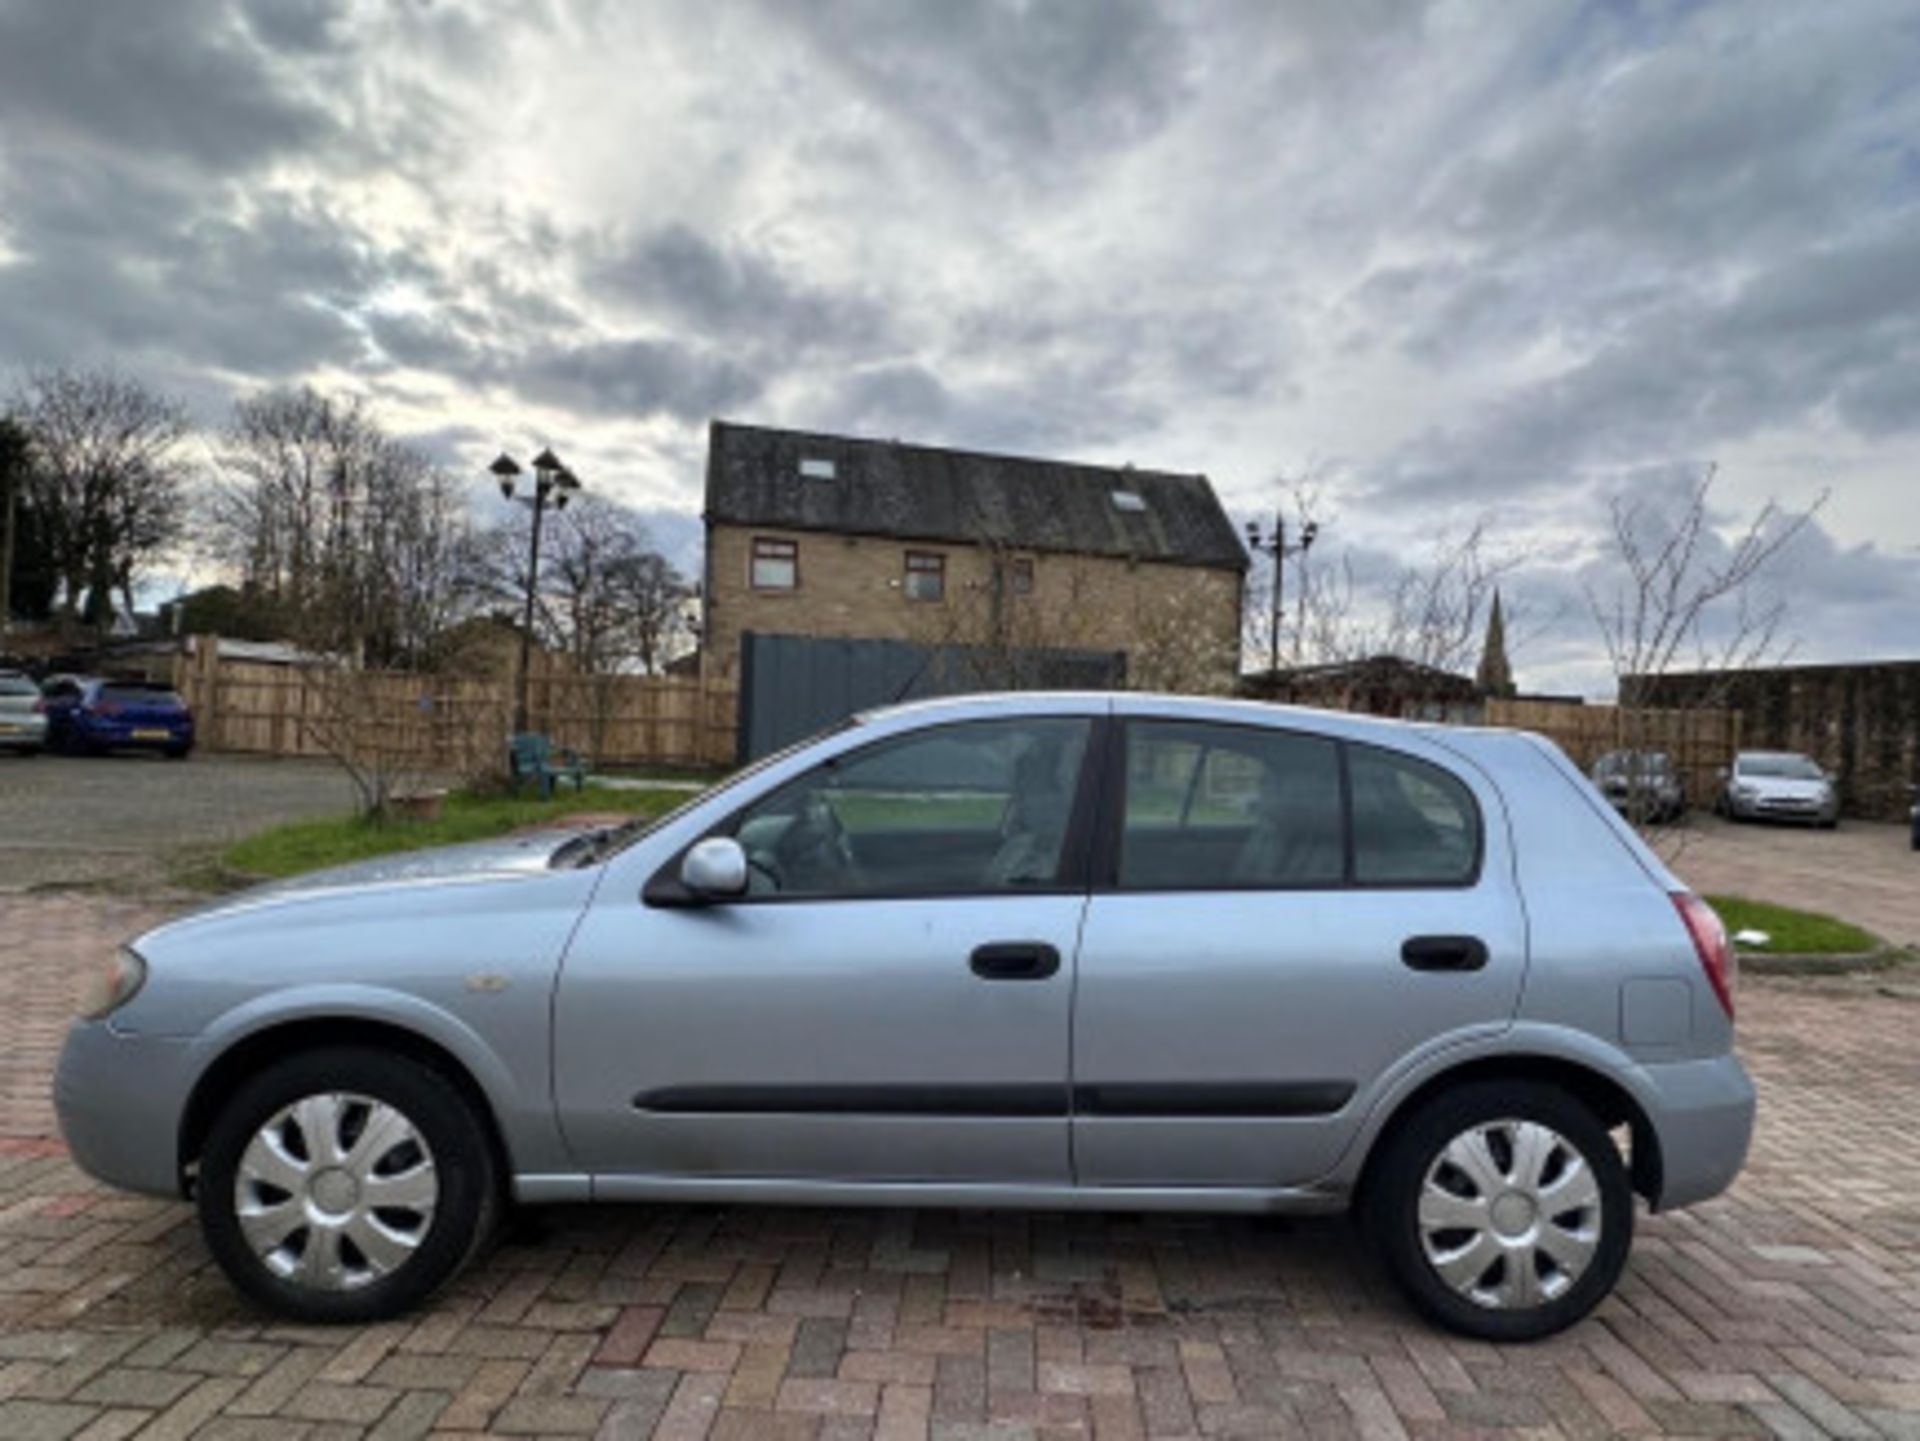 2006 NISSAN ALMERA - PERFECT CAR FOR BEGINNERS AND YOUNG LEARNERS >>--NO VAT ON HAMMER--<< - Image 30 of 92